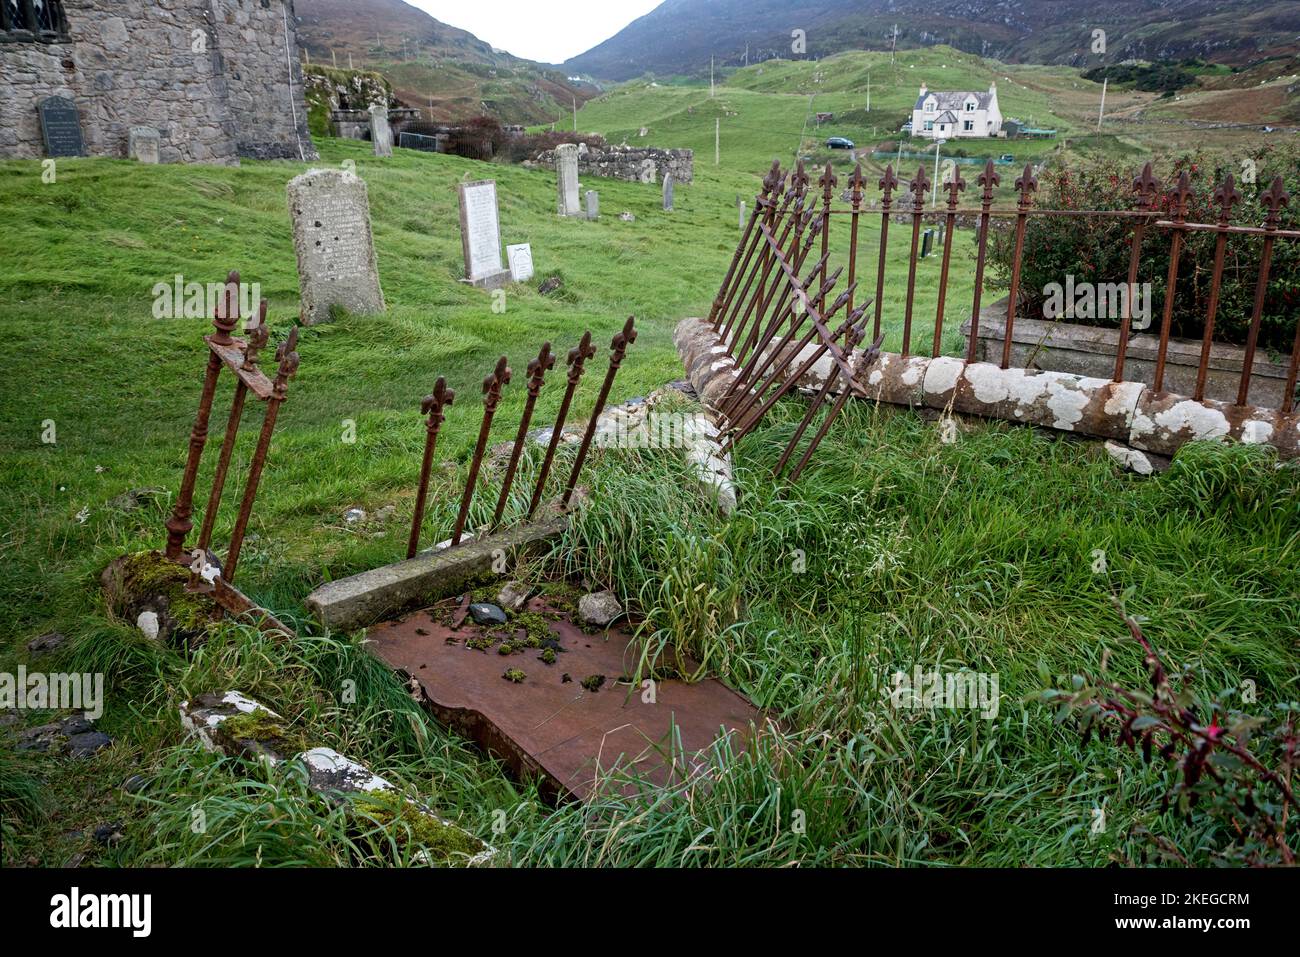 Graveyard by St Clement's Church, a late 15th or early 16th century church at Rodel on the Isle of Harris in the Outer Hebrides, Scotland, UK. Stock Photo